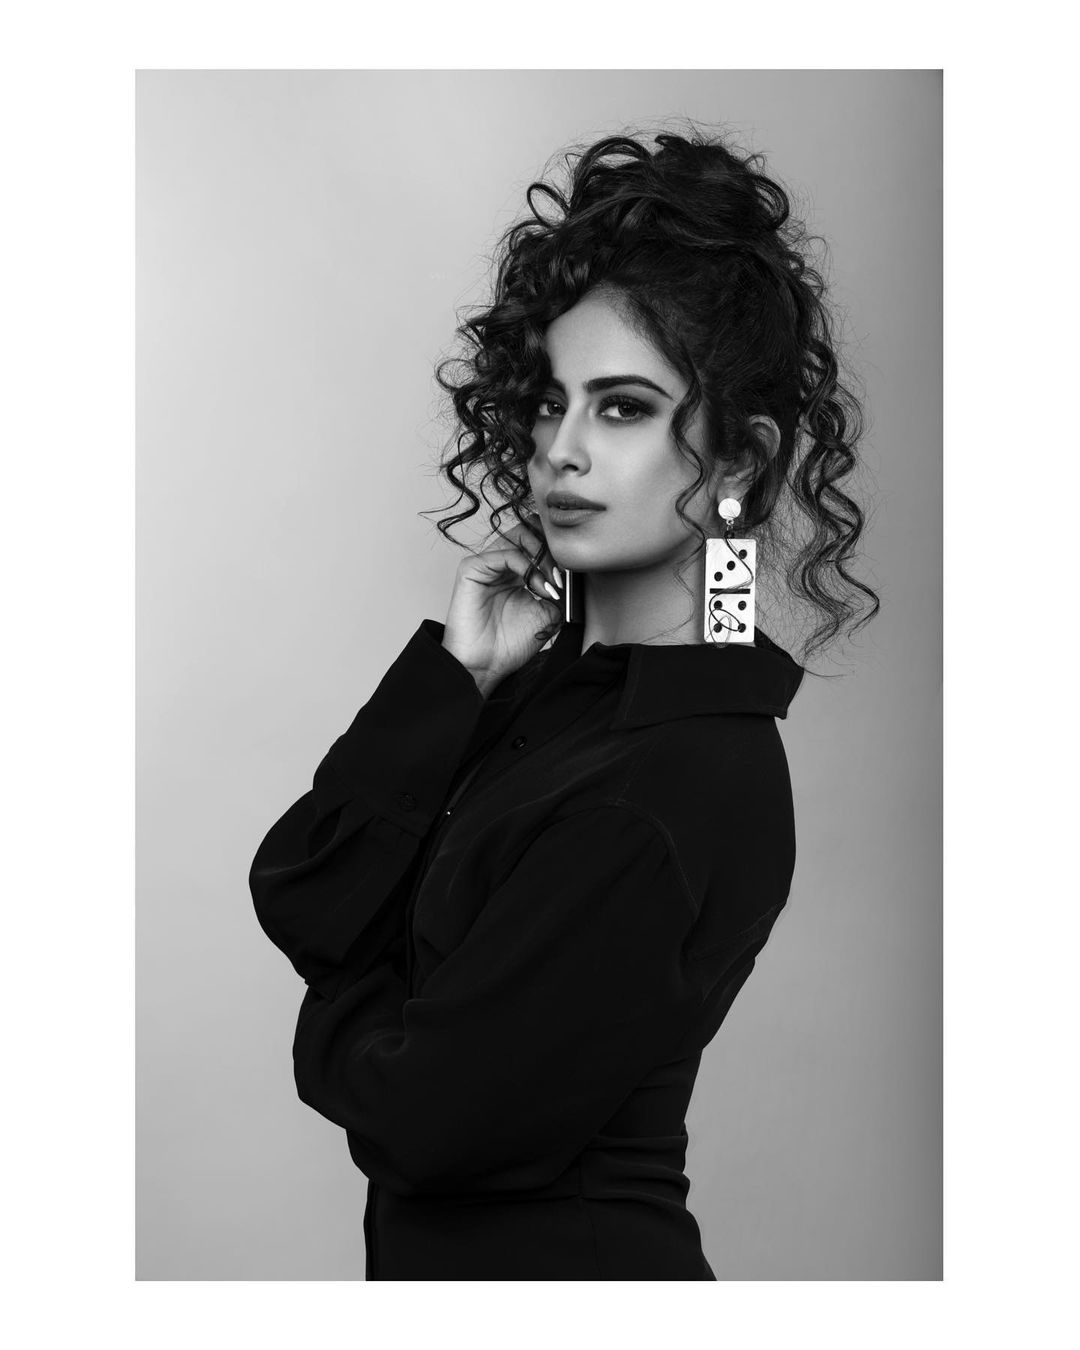 Avika Gor’s sizzling look in this photograph raised the temperature on Instagram. She looks stunning in black outfit. (Image: Instagram)